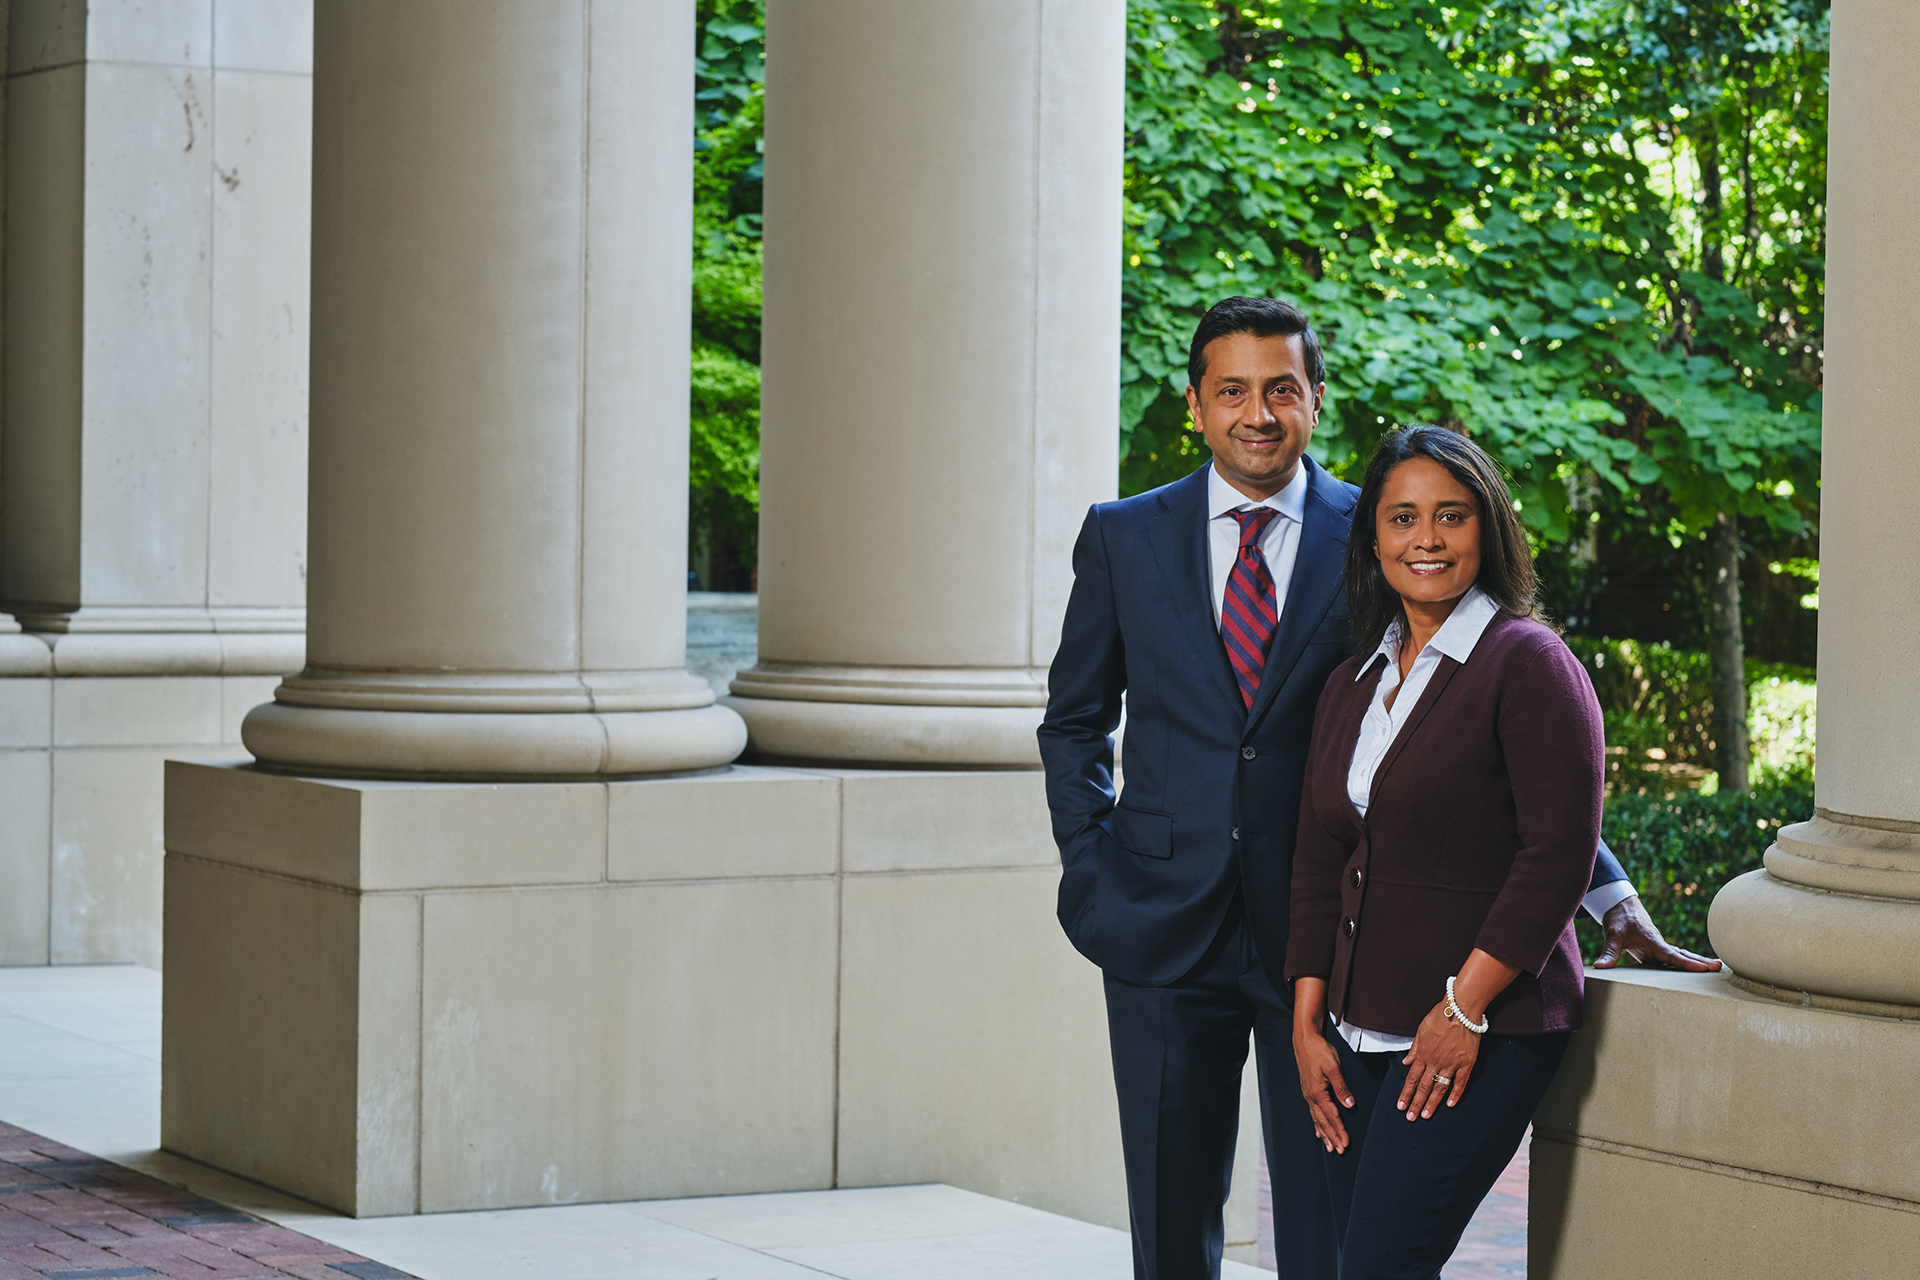 Thomas and Libby Mathai pictured on the Old Parkland campus near the office of the Southwestern Medical Foundation where they support future medical leaders through their philanthropy.